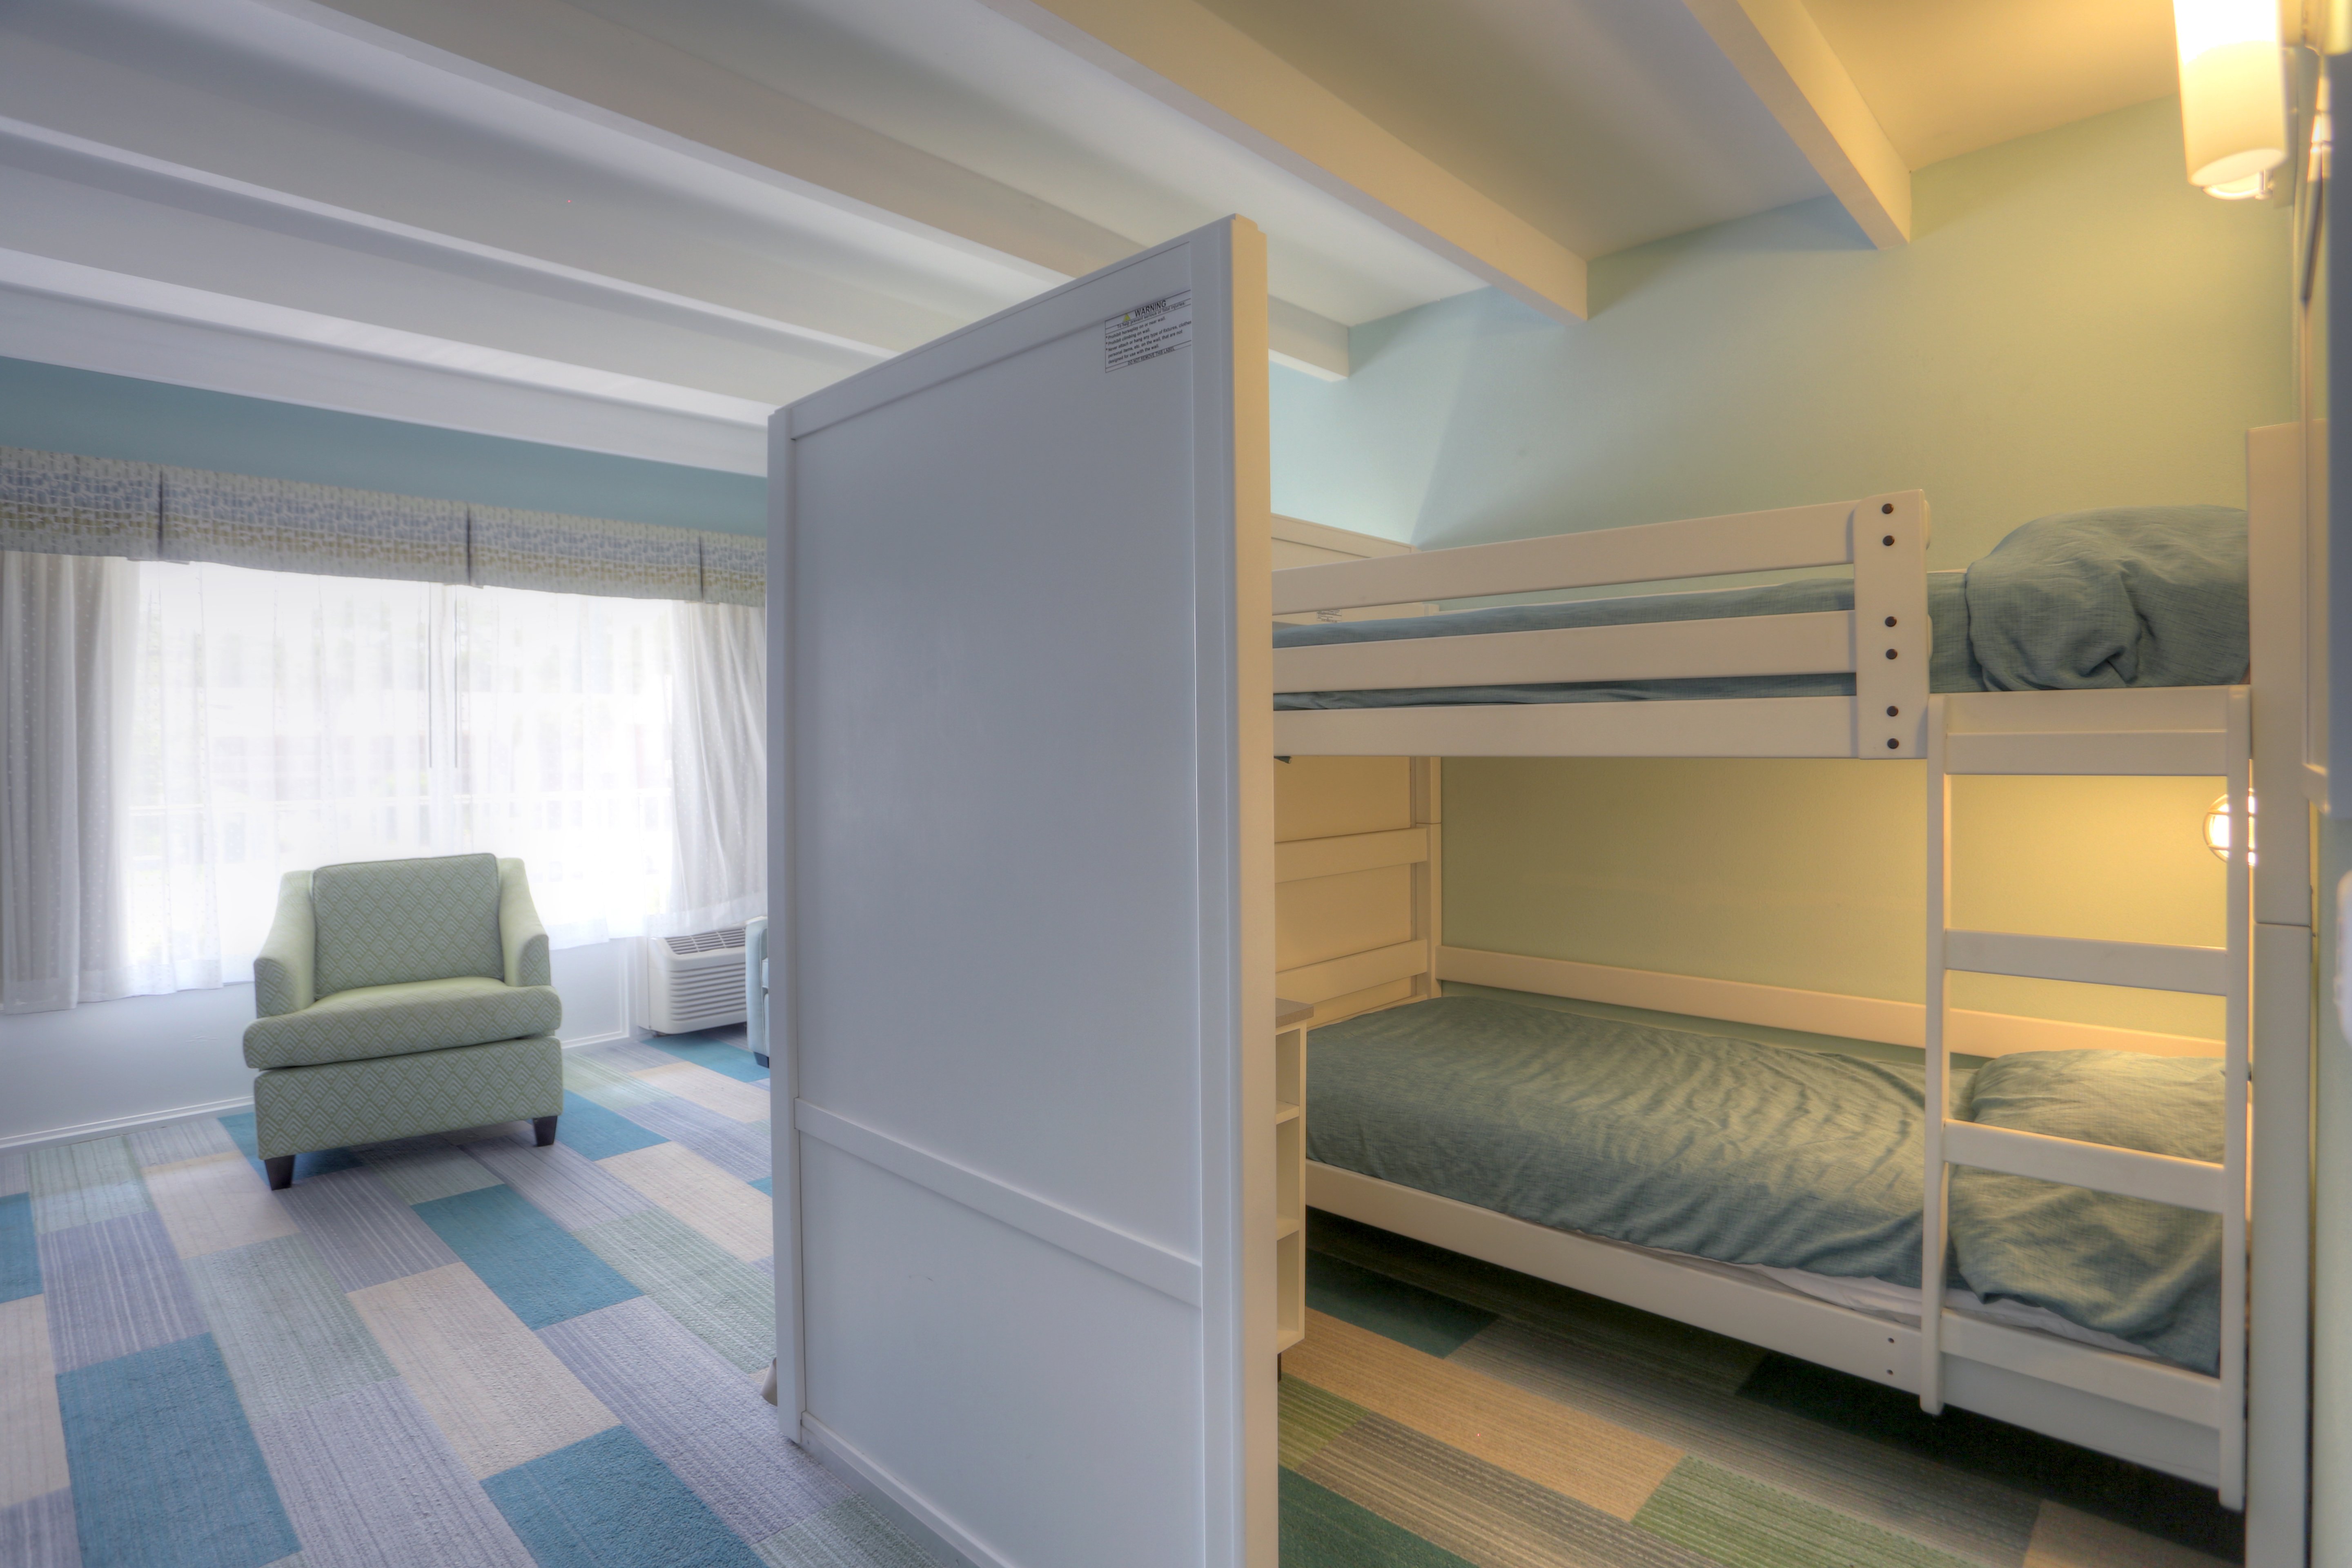 The Kid???s Suite includes bunk beds for your little ones to enjoy!